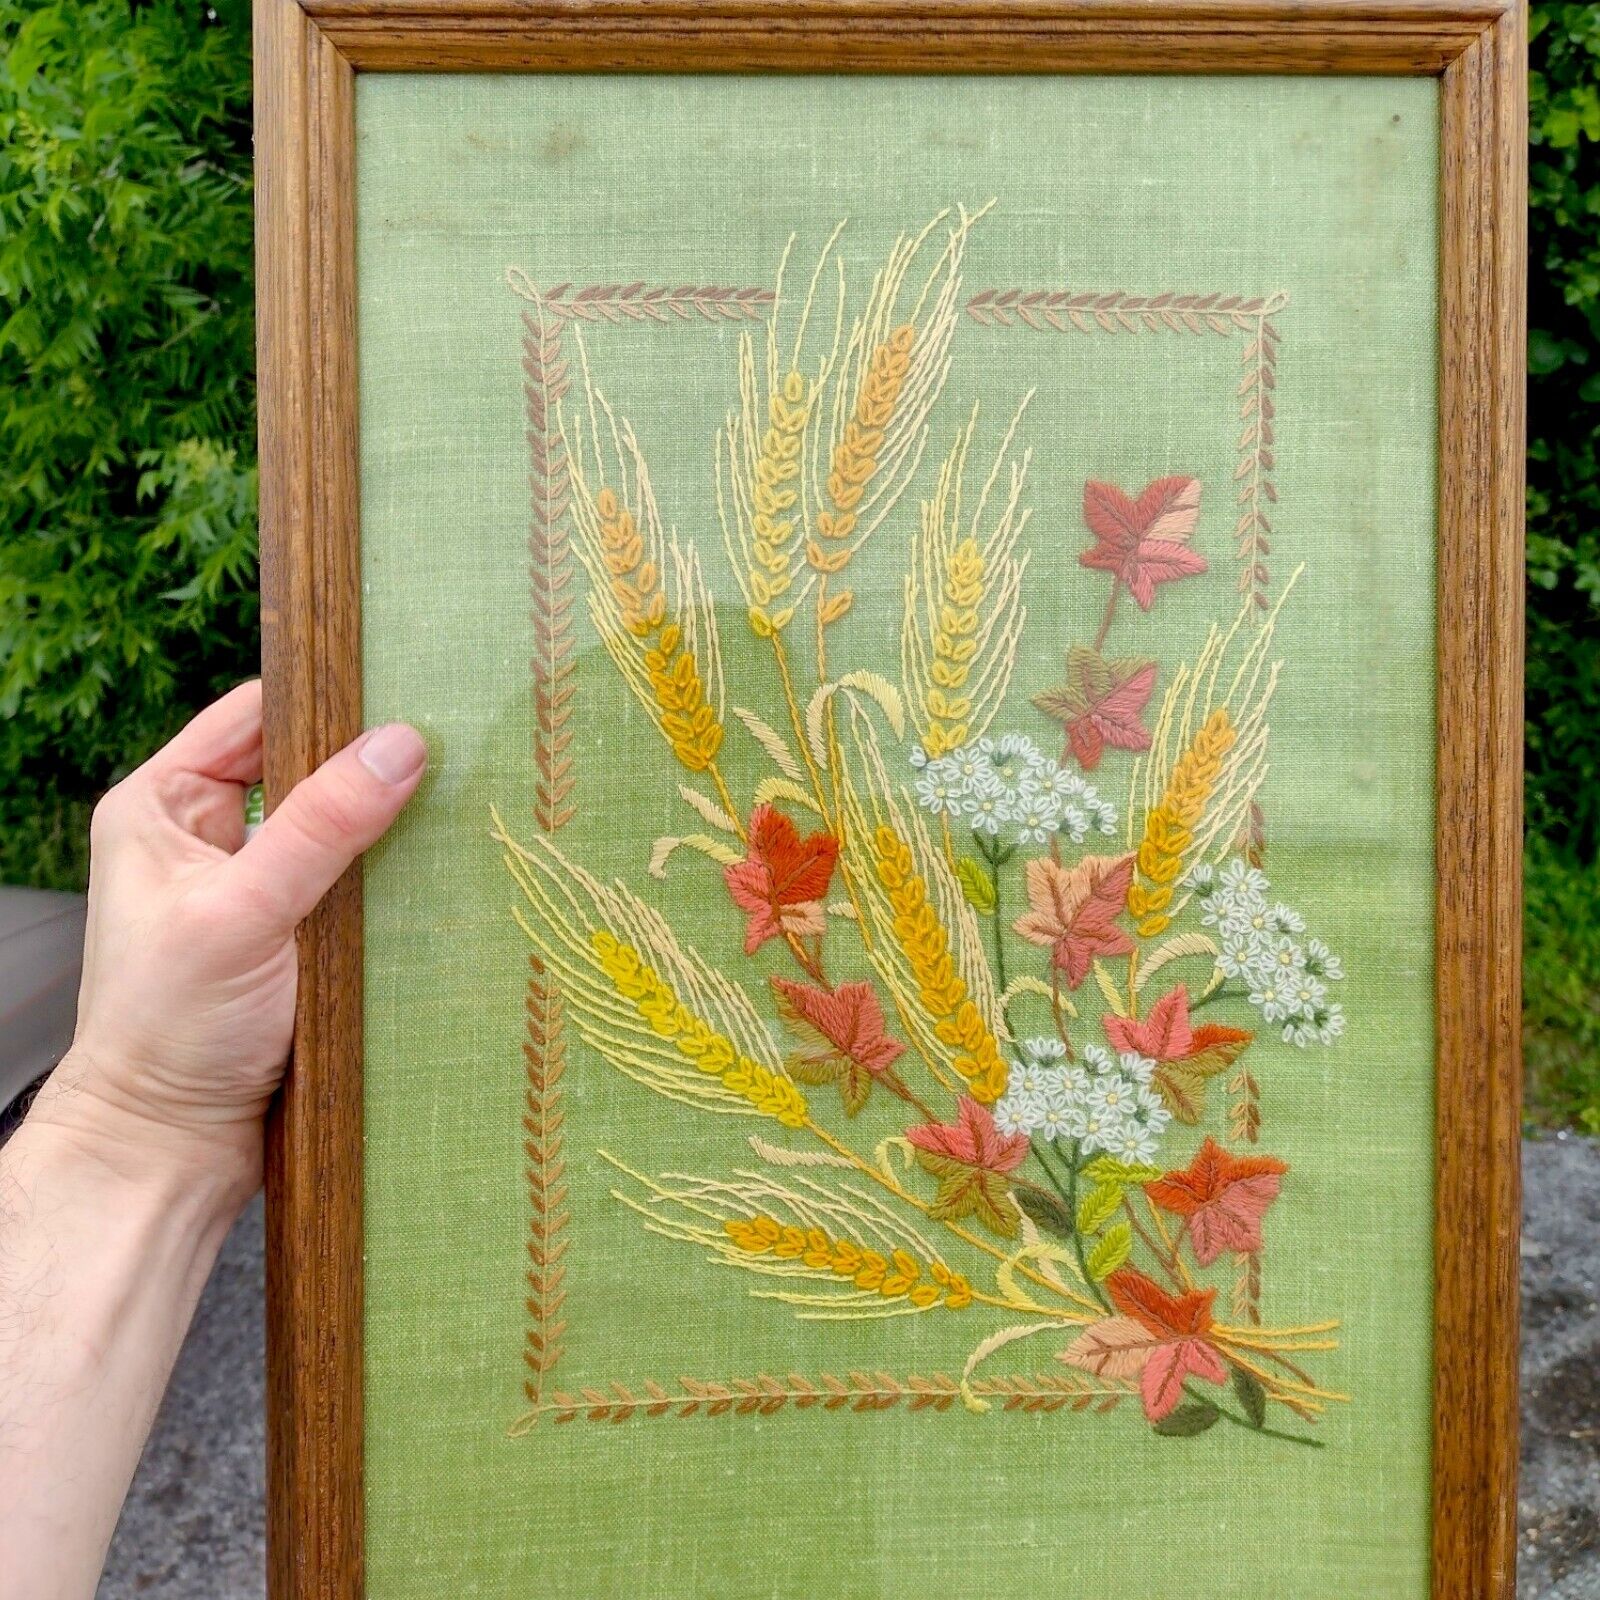 Vintage Golden Wheat & Flowers Crewel Framed Needlepoint Embroidery Retro Floral